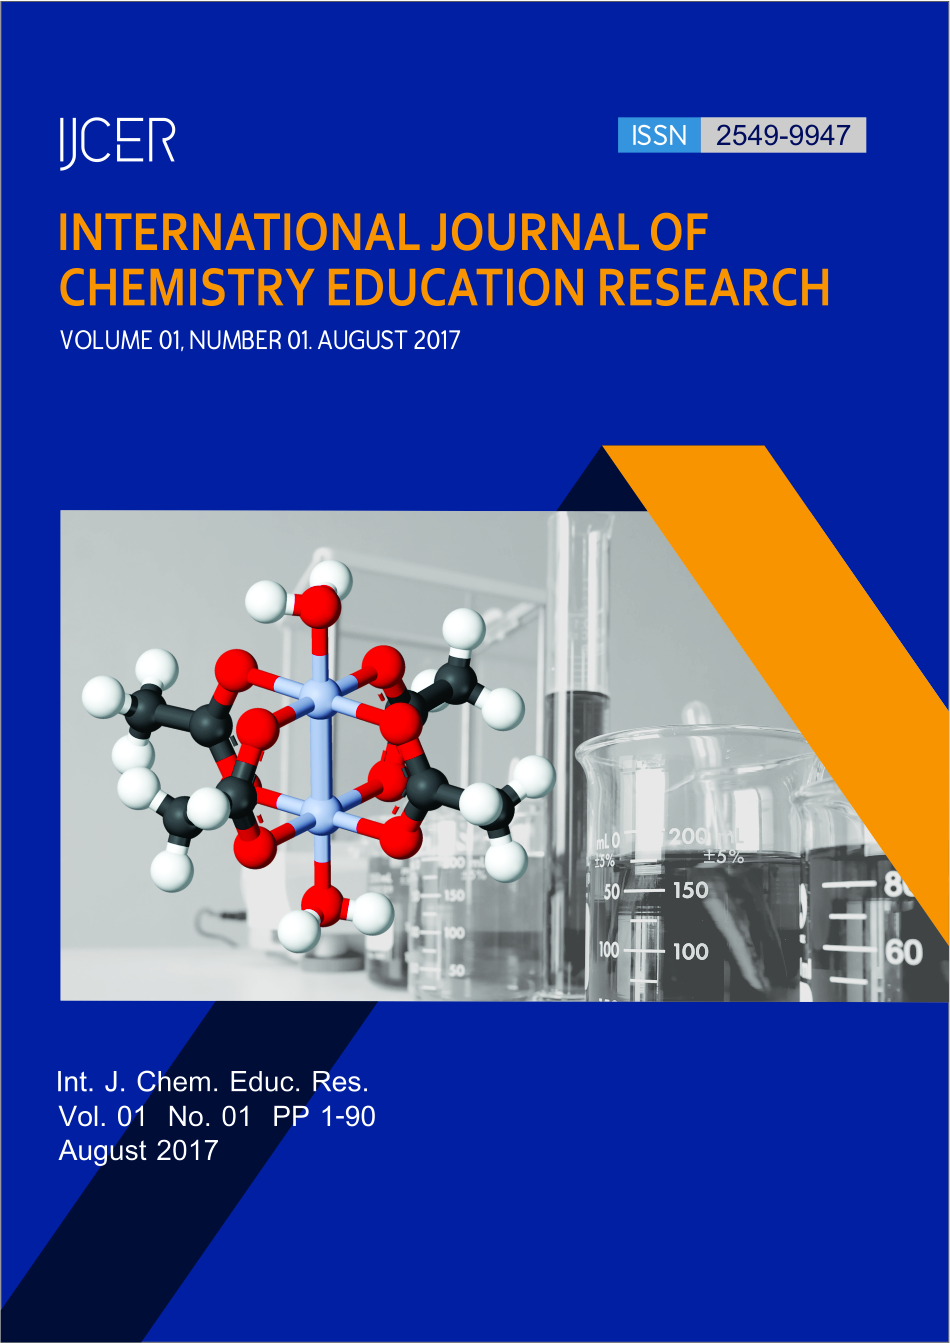 International Journal of Chemistry Education Research